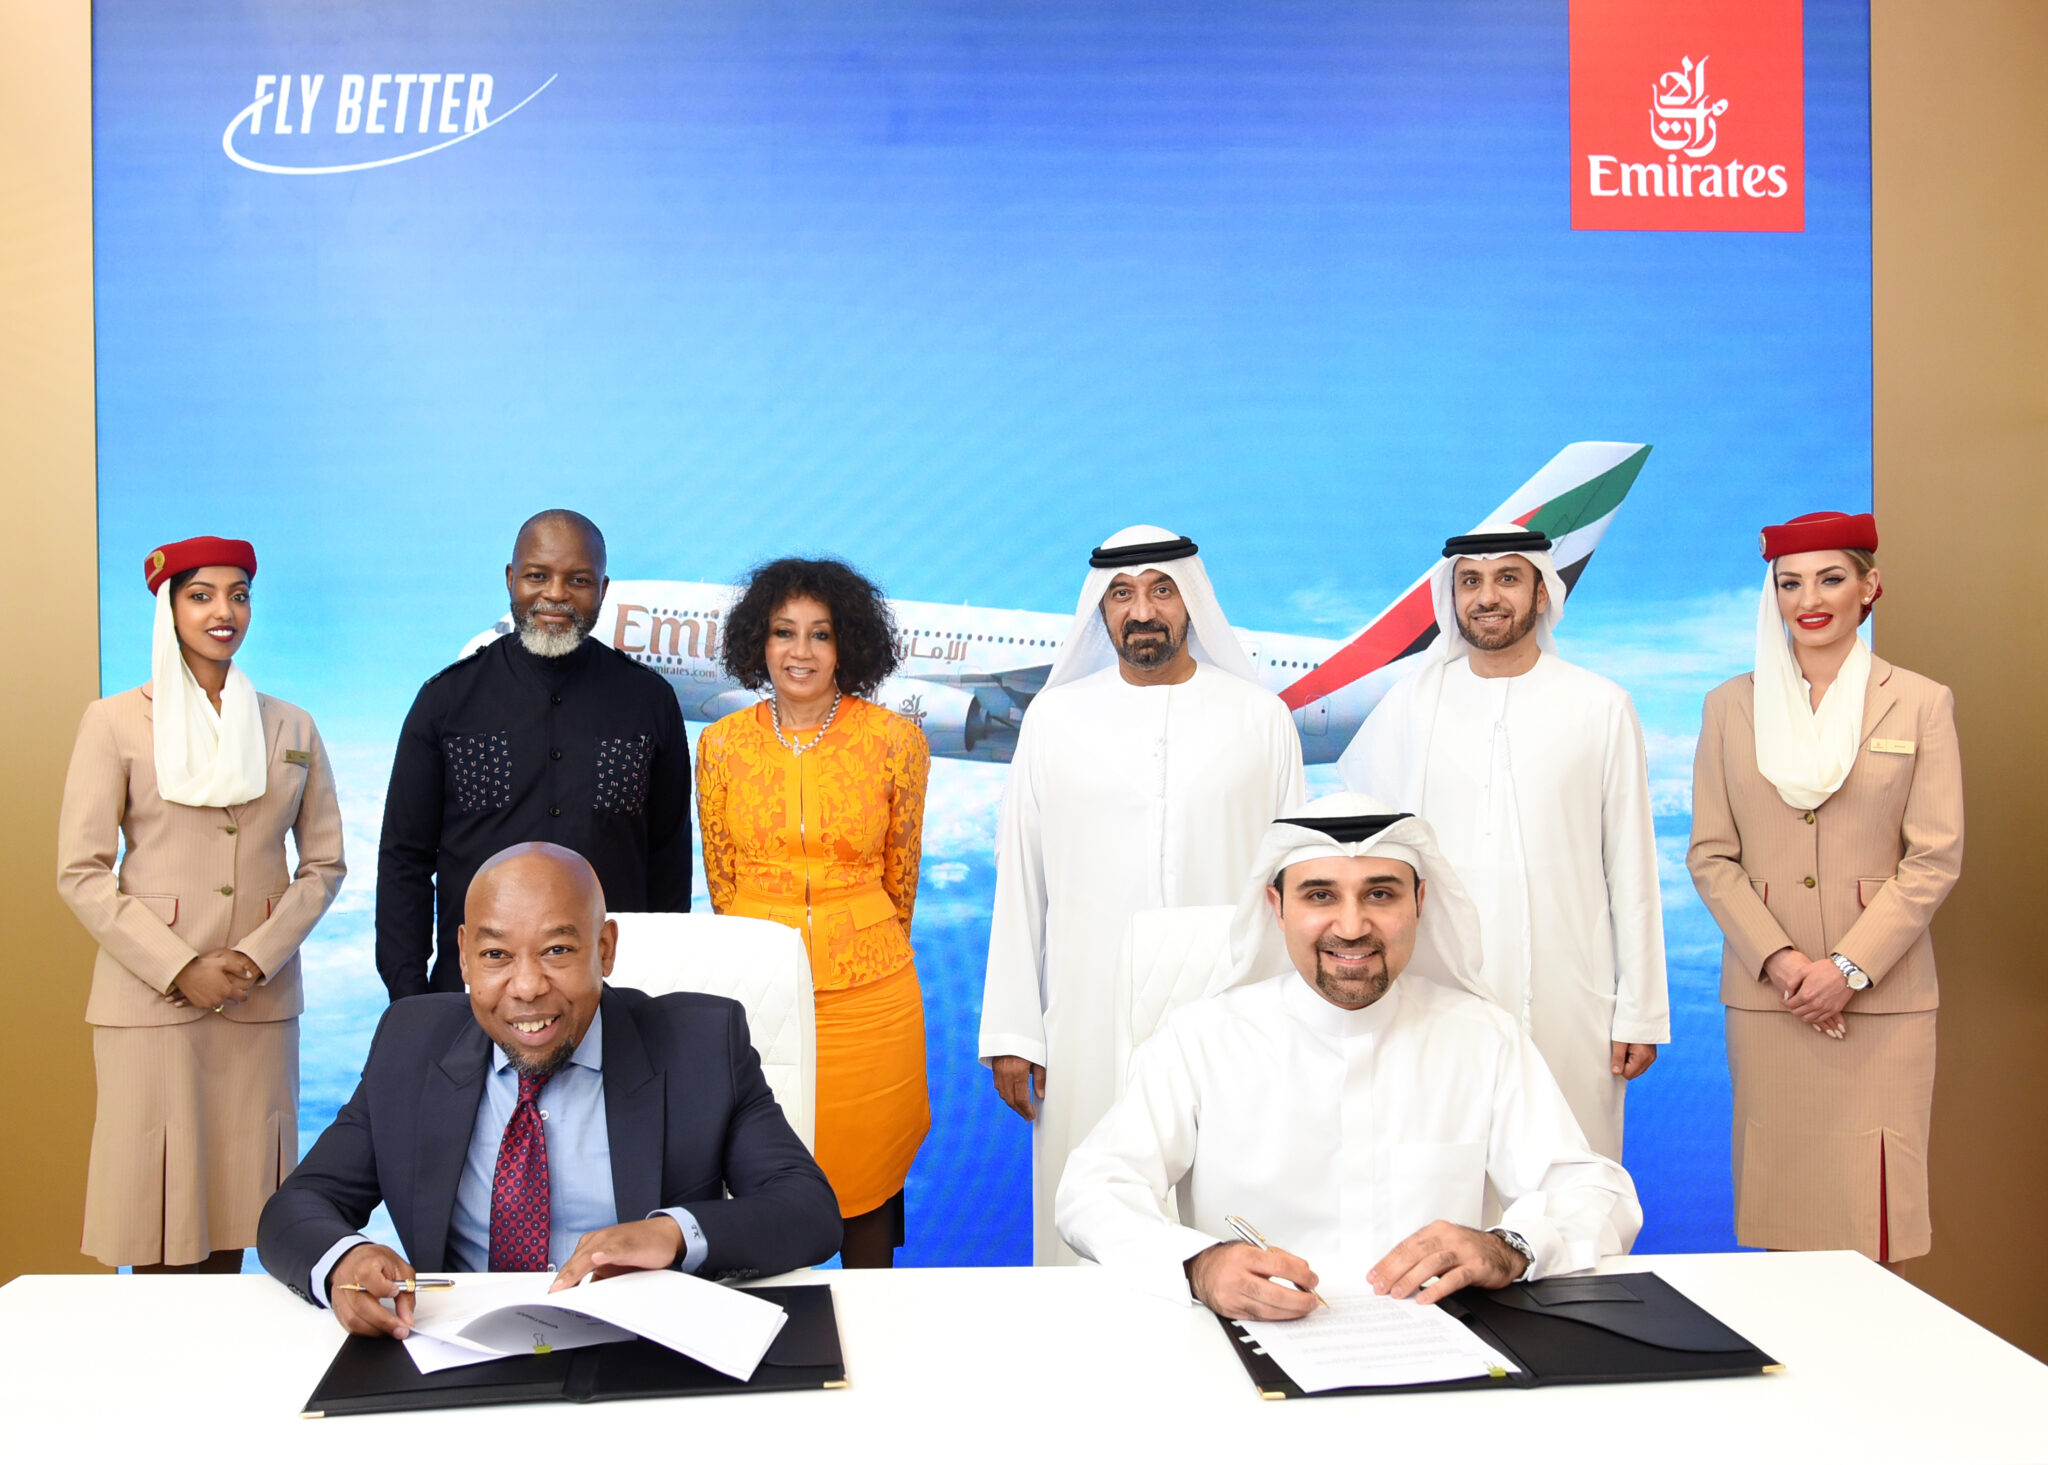 Emirates aims to boost South Africa’s tourist arrivals